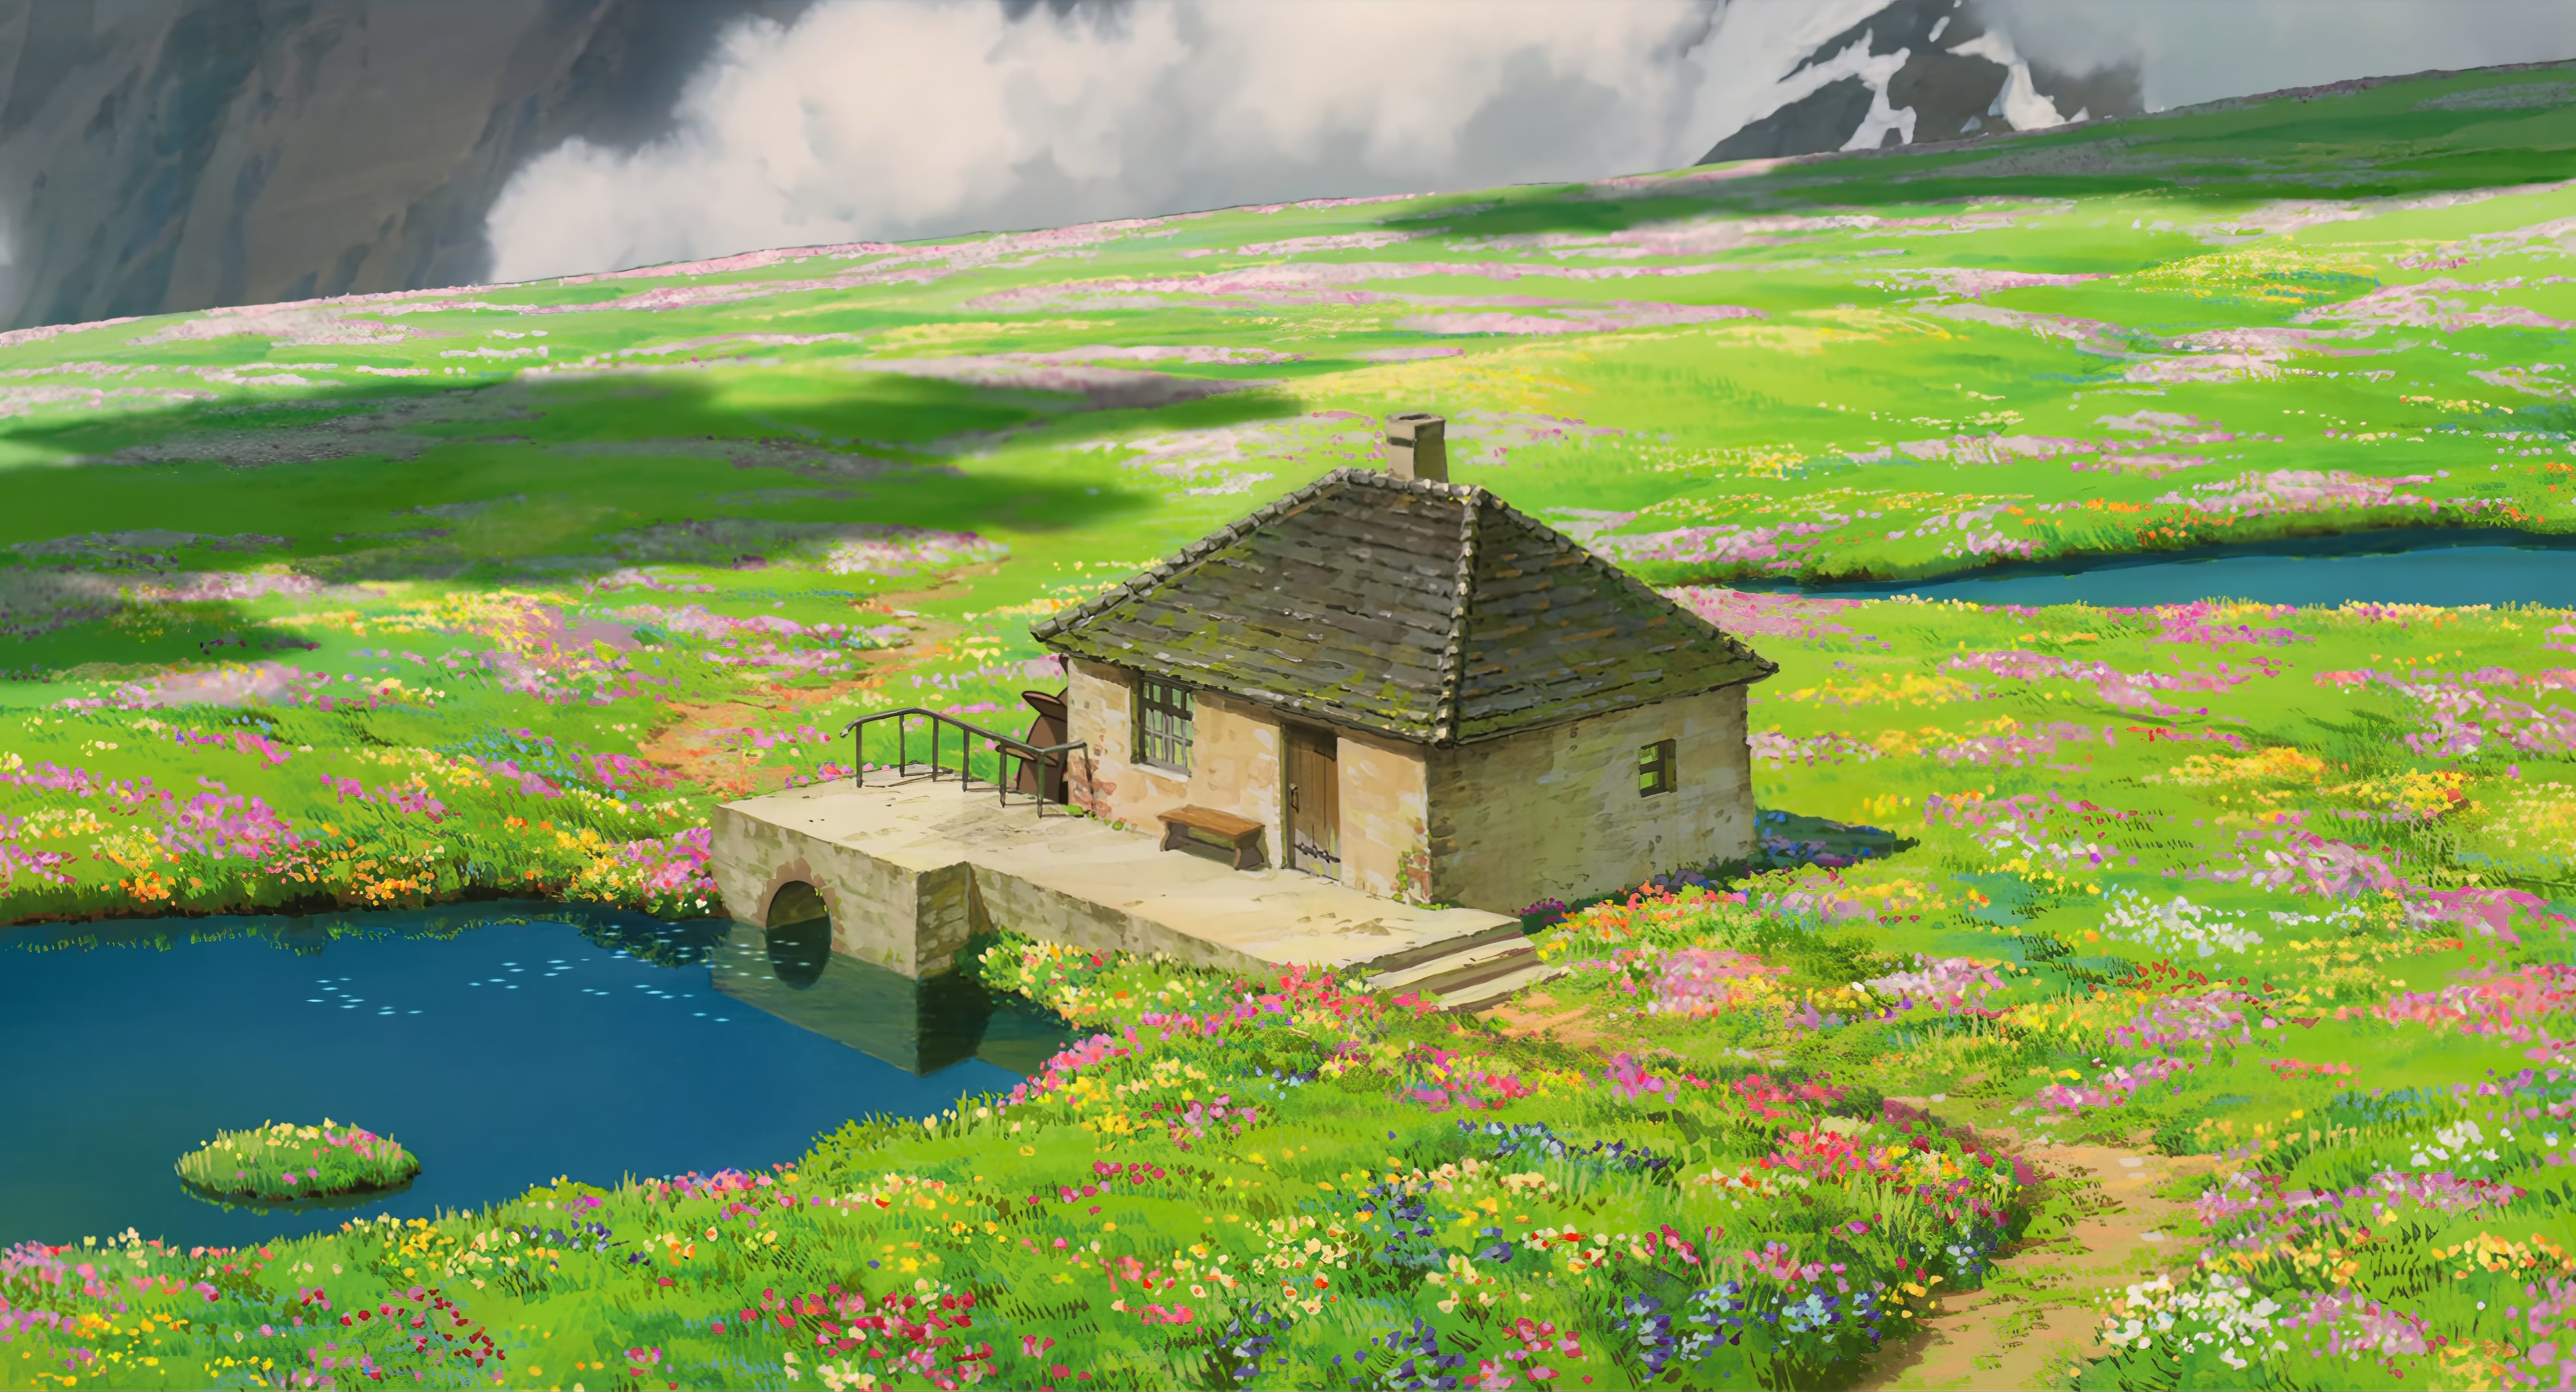 Howls Moving Castle Studio Ghibli Anime Field House Water Reflection Clouds Plants 3840x2075